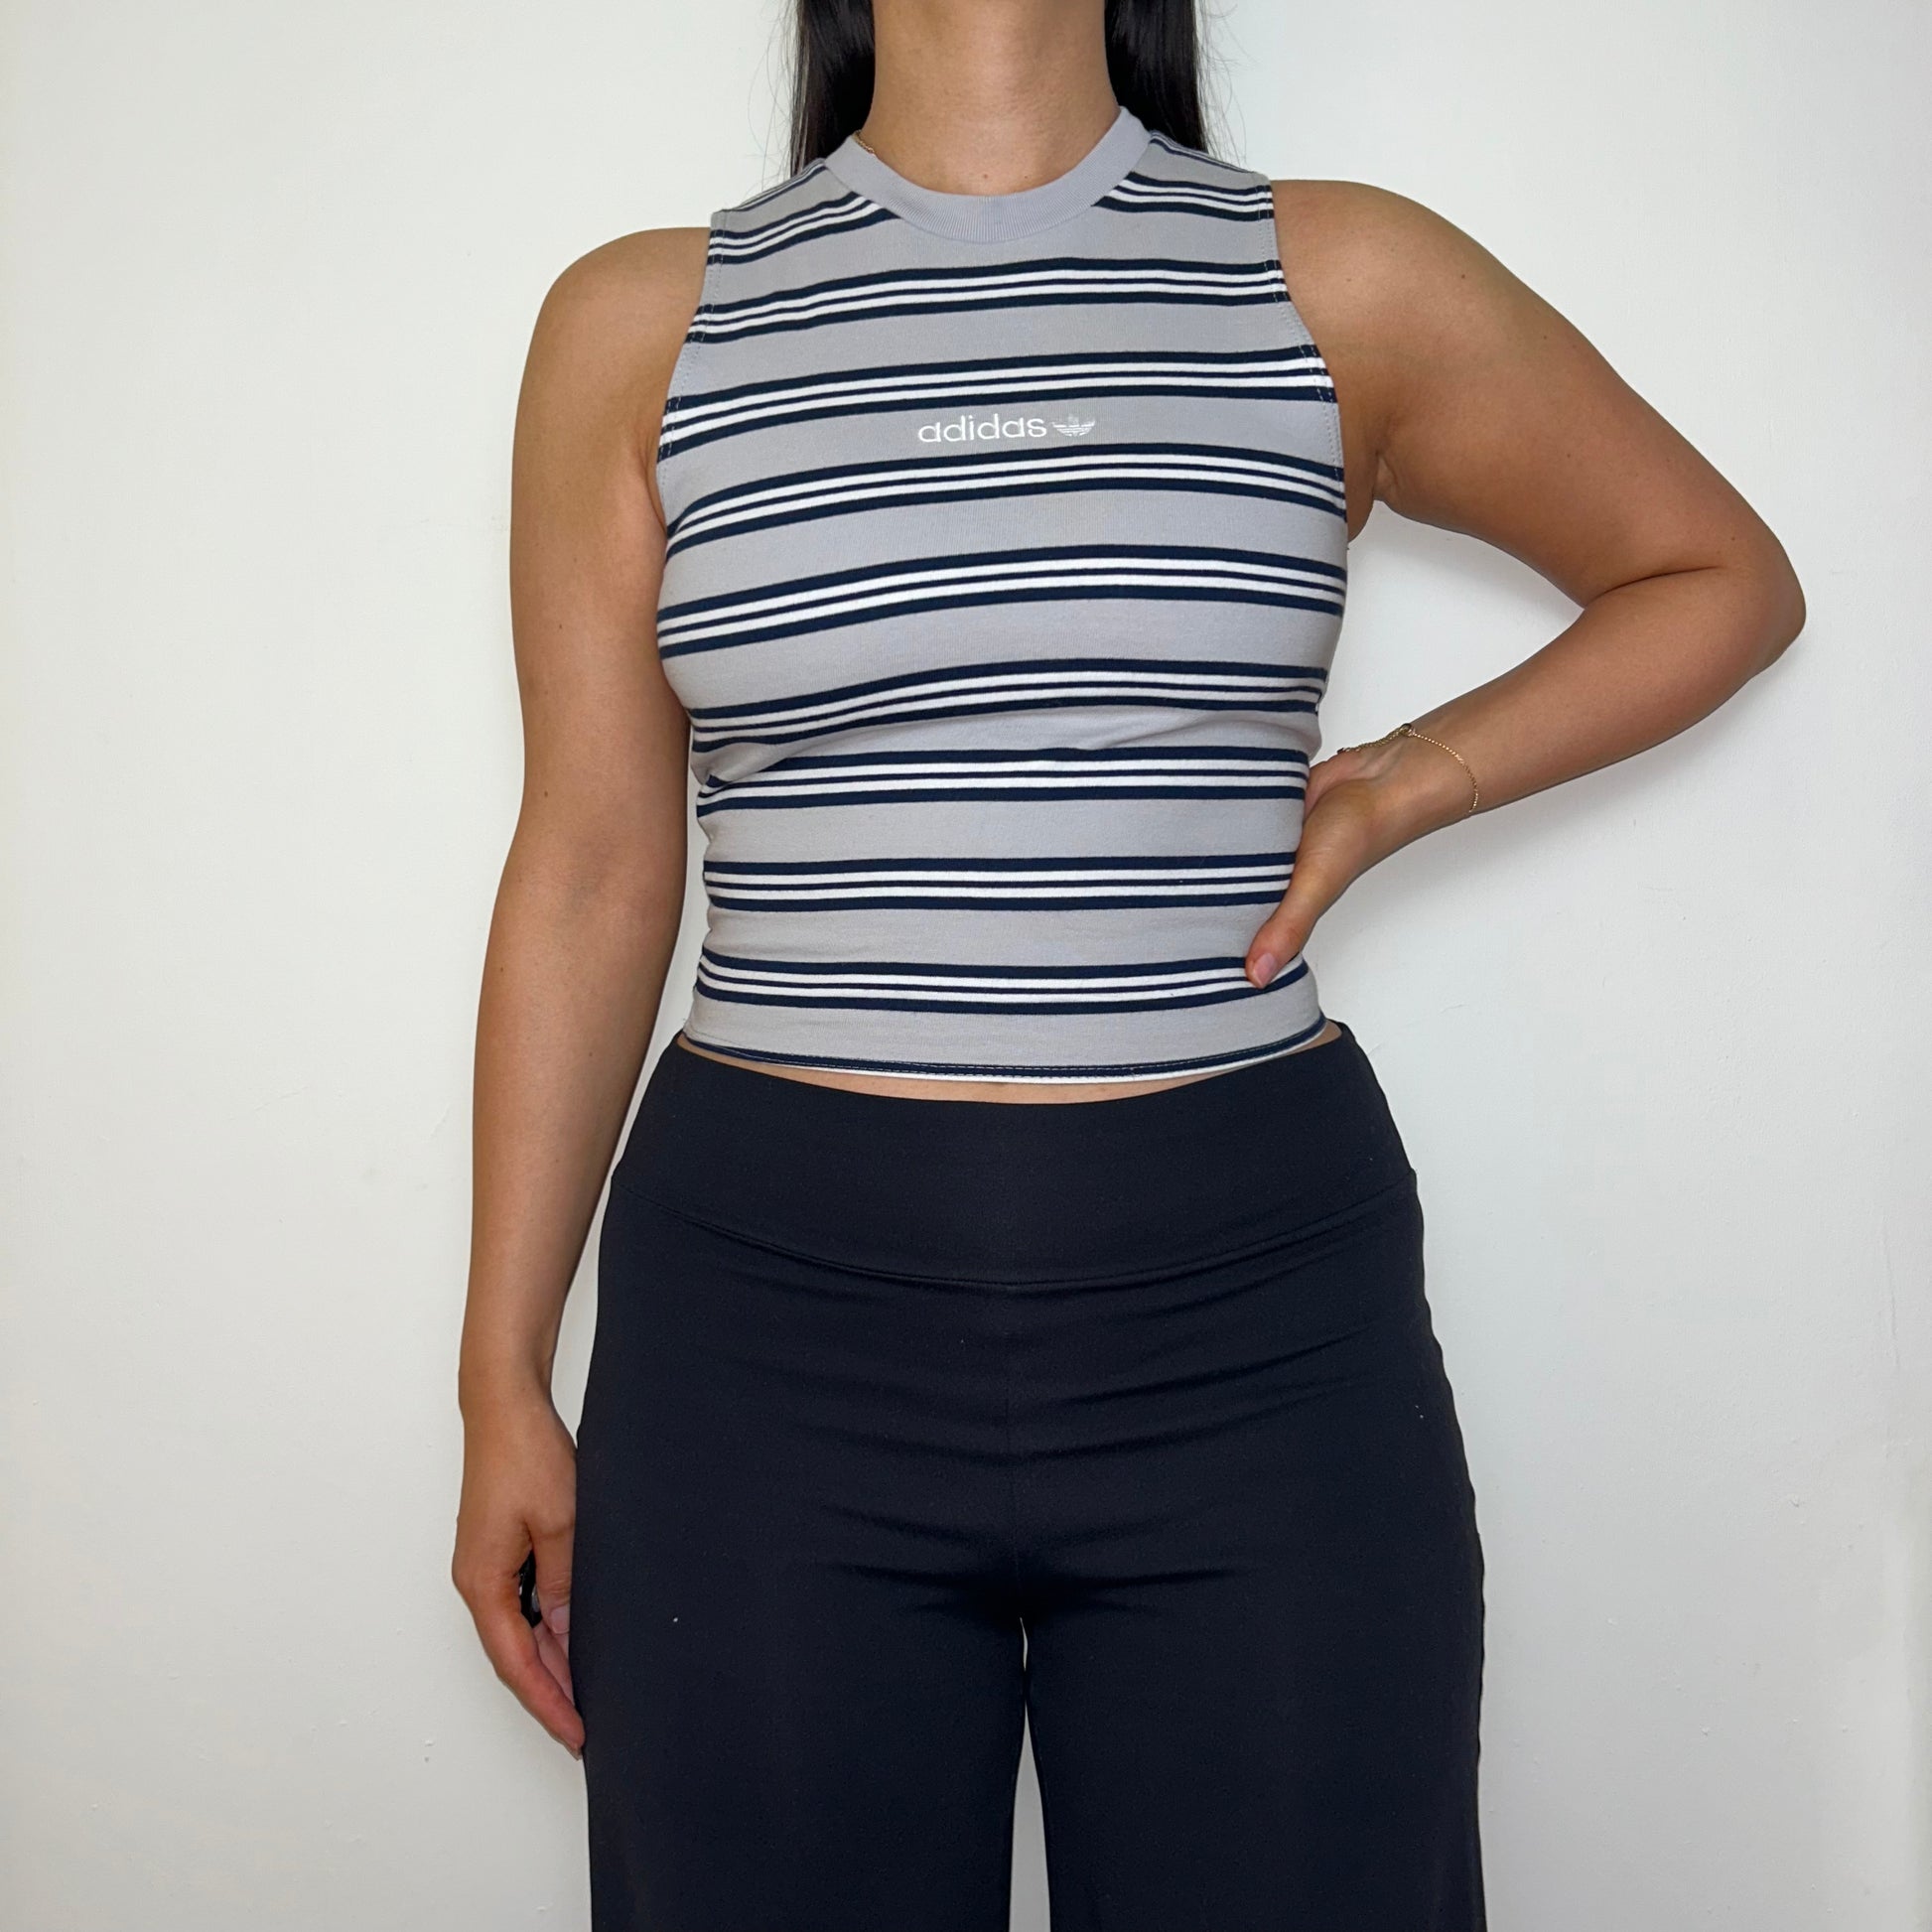 grey stripe sleeveless crop top with white adidas logo shown on a model wearing black trousers